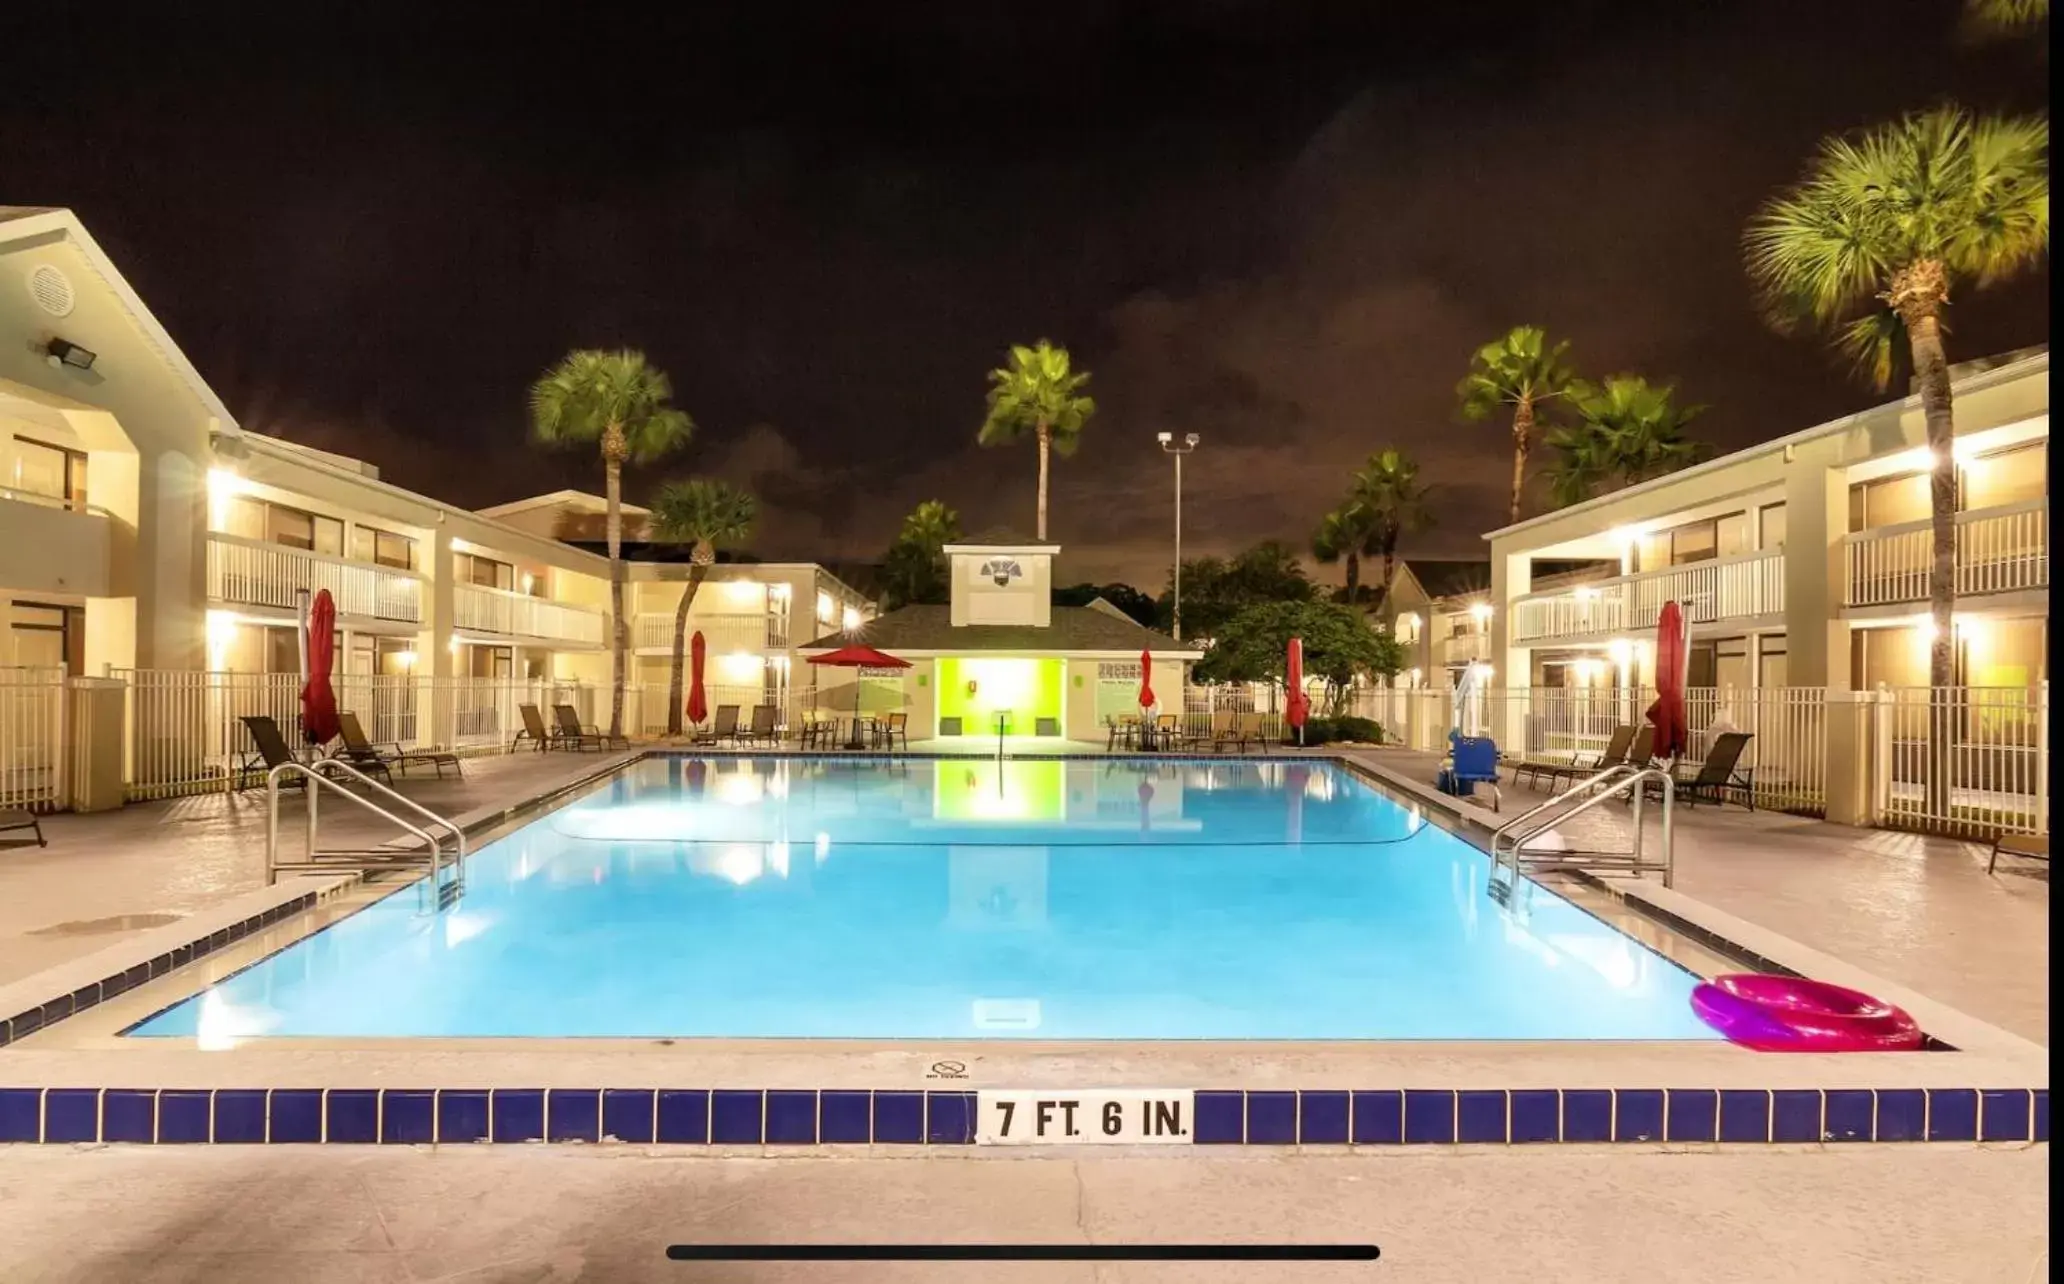 Property building, Swimming Pool in Hotel Room Near Disney 4 People